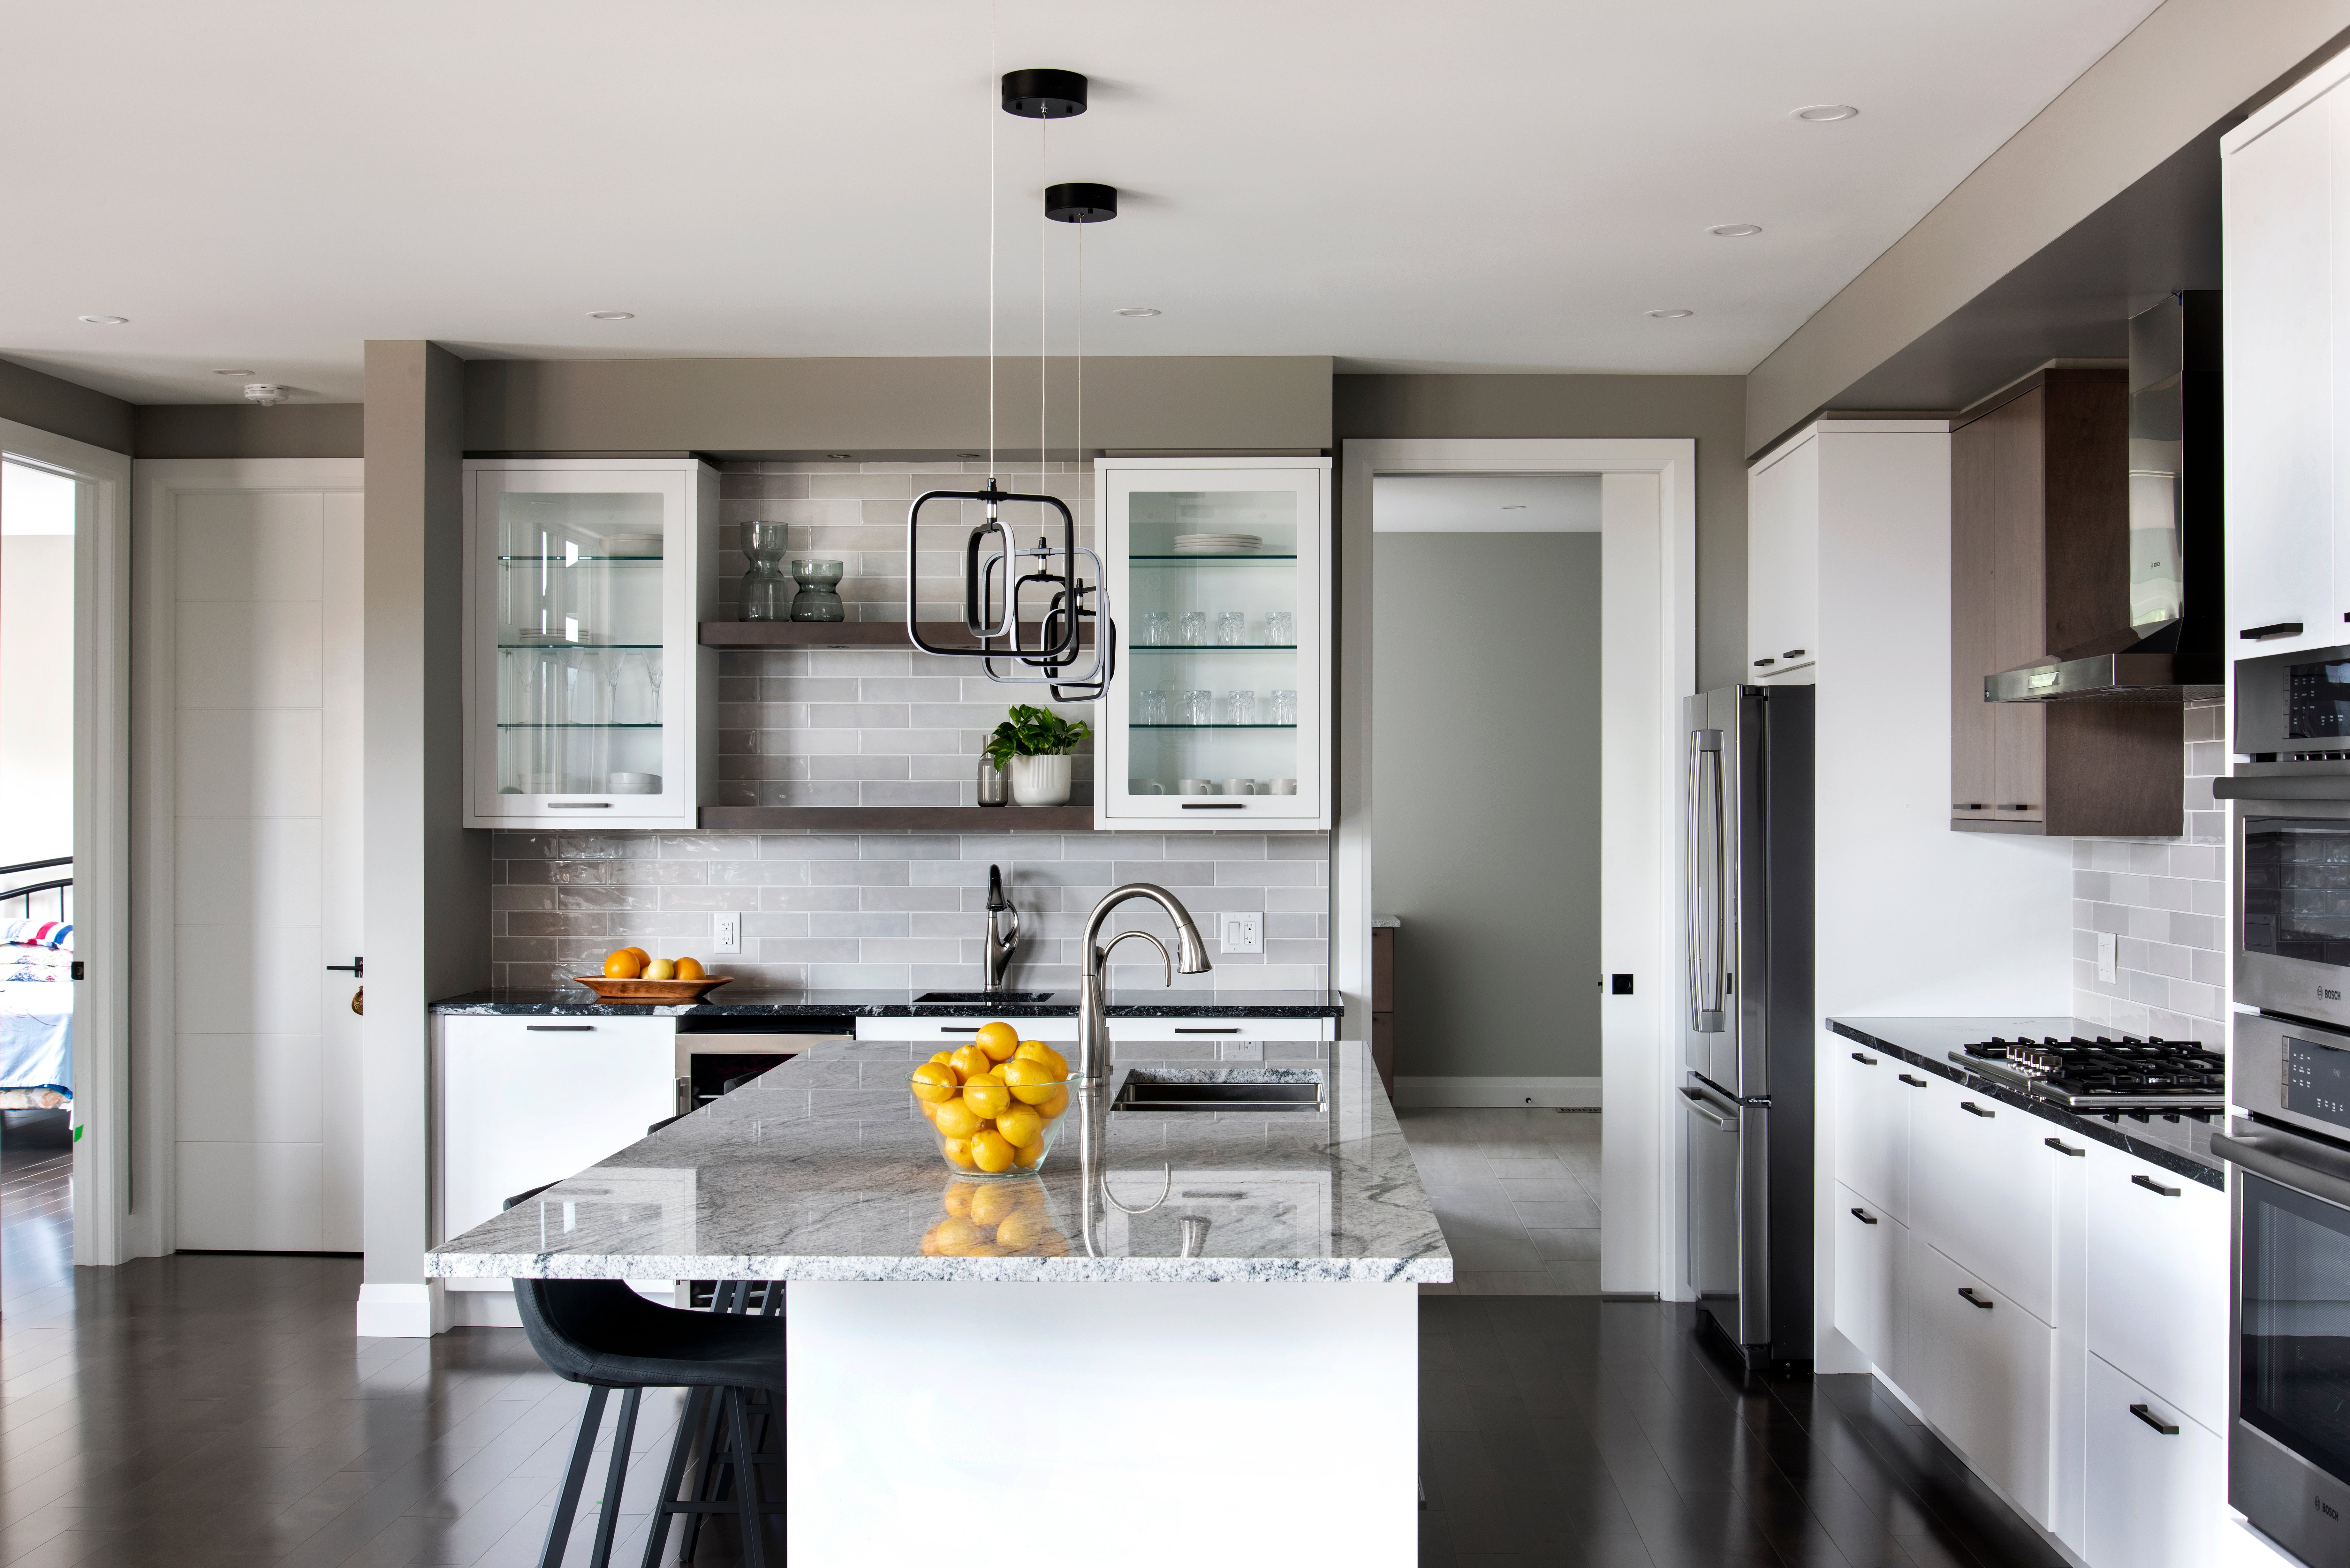 A Deslaurier kitchen with a neutral colour scheme, accented with bright fruit display pieces.